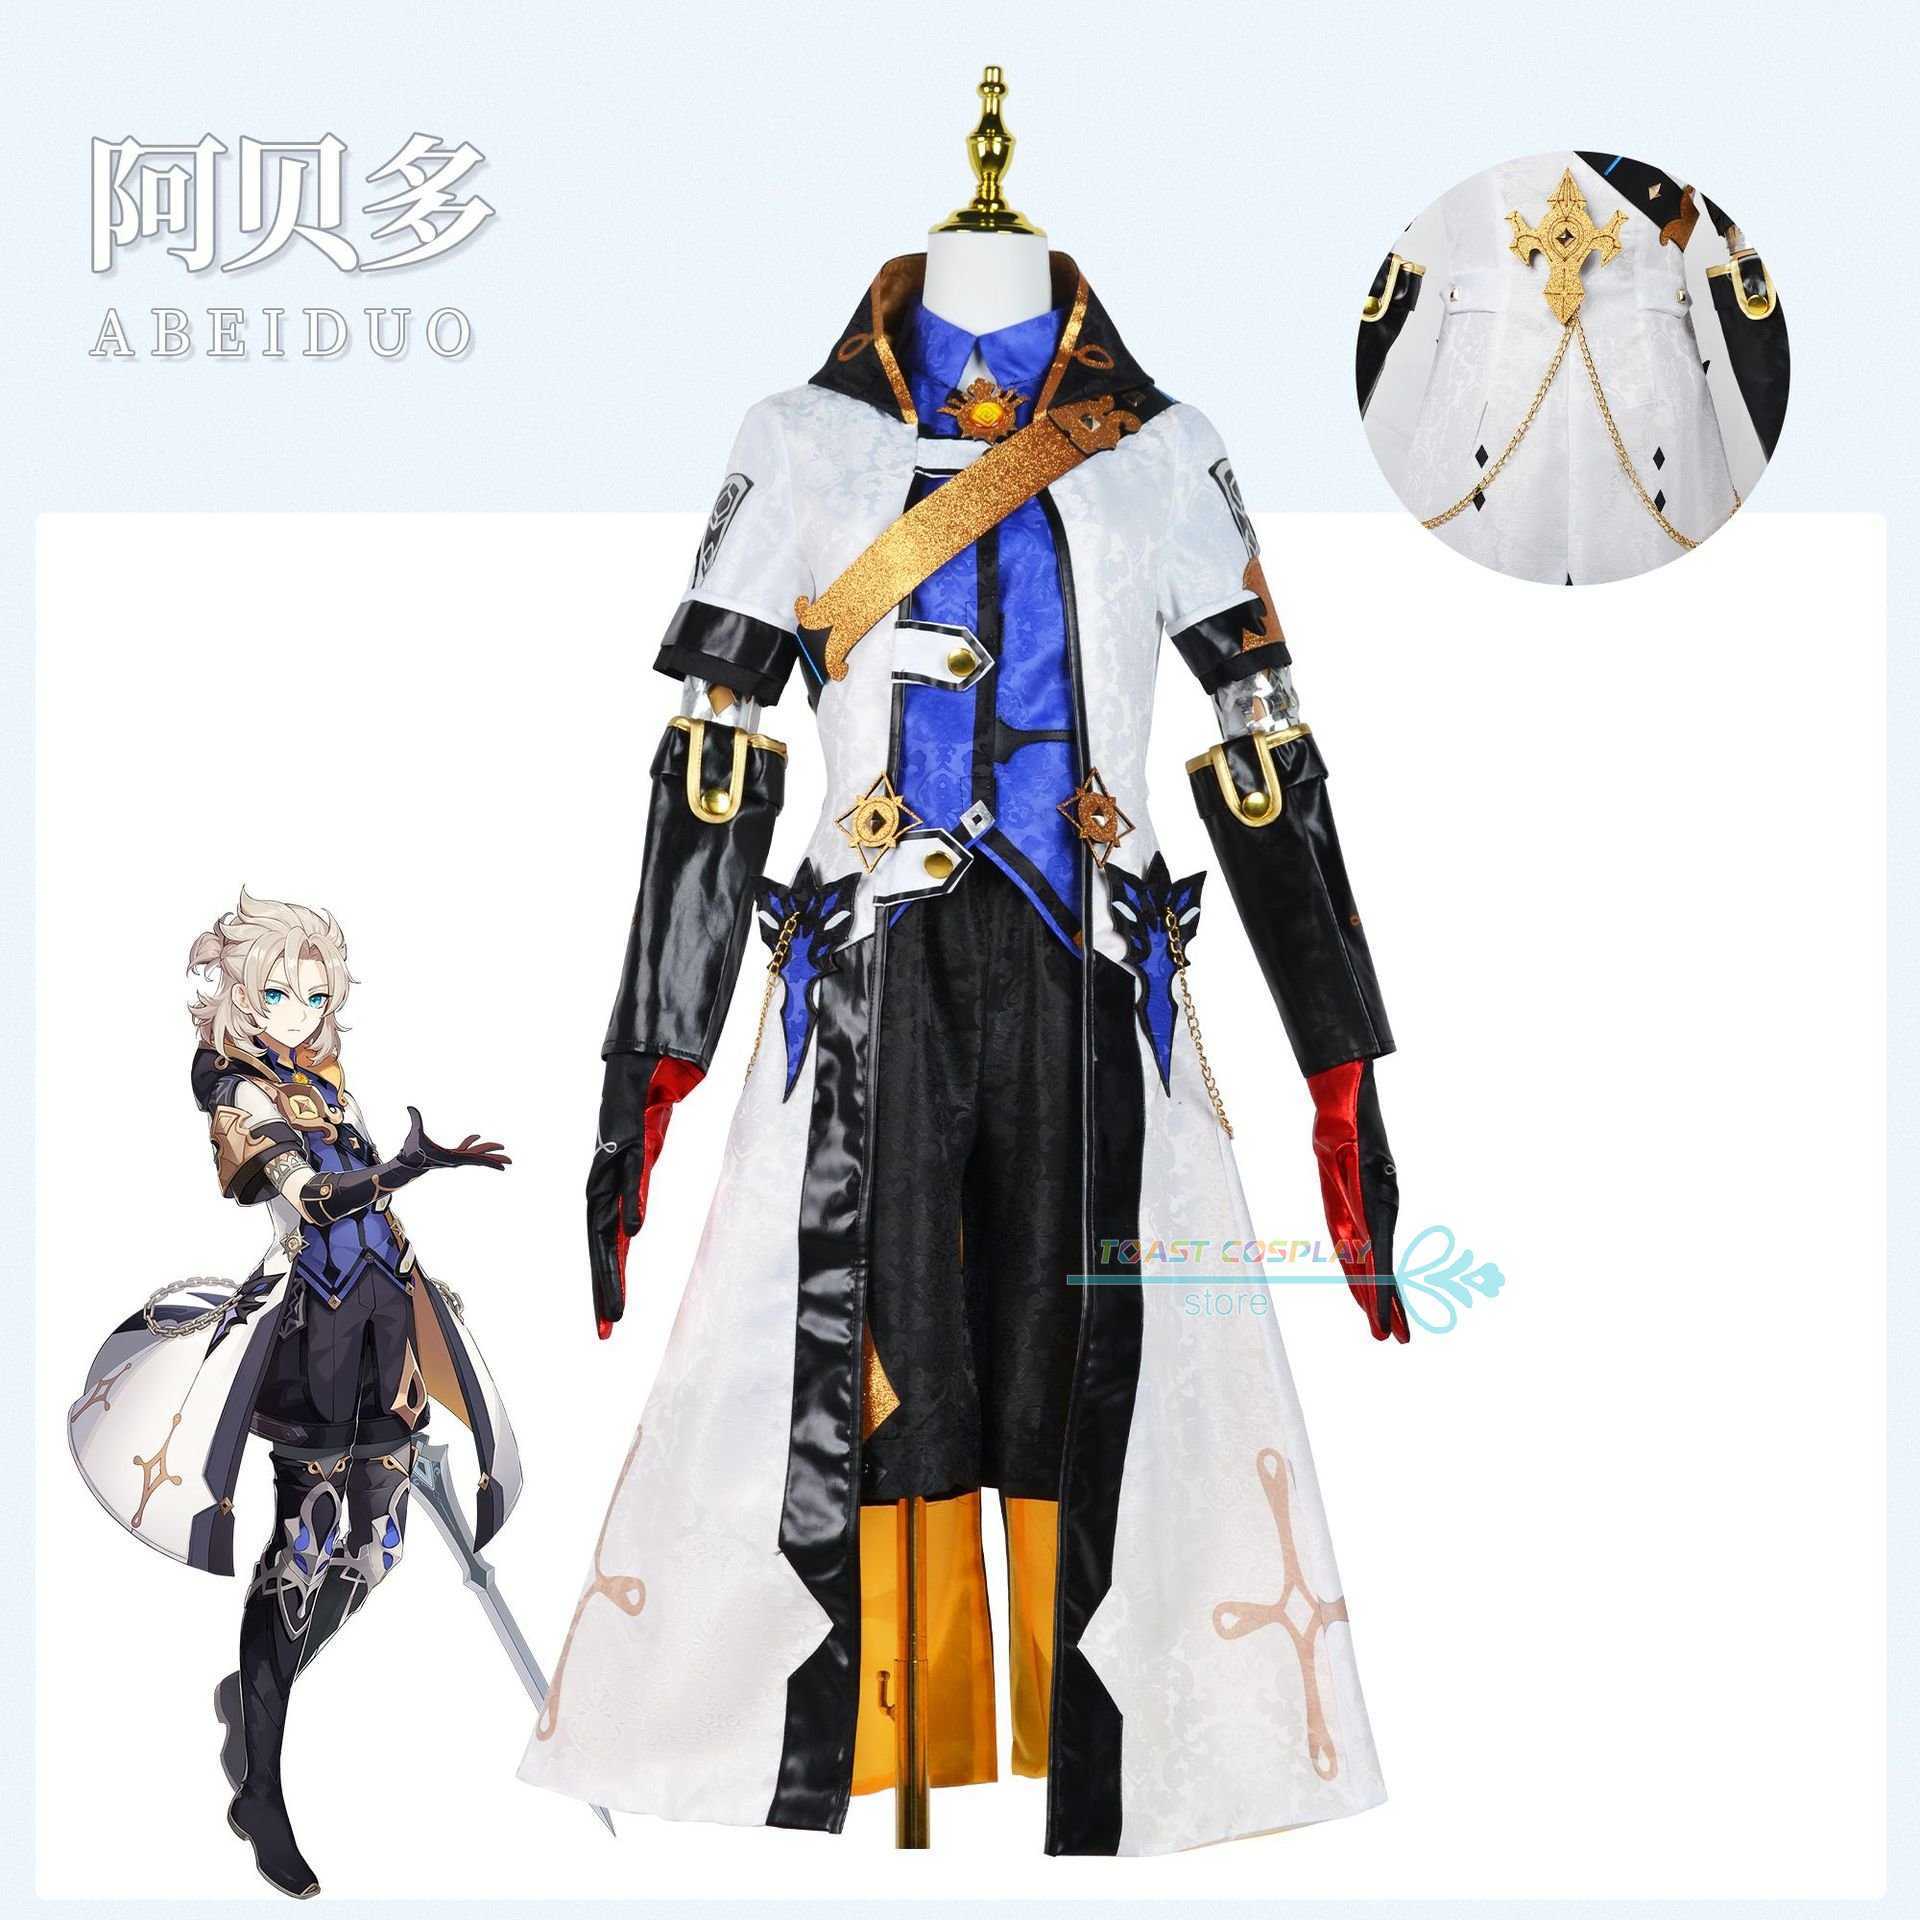 

Anime Costumes Game Genshin Impact Come Albedo Anime Cosplay Halloween Party Clothes Wig Jacket Suit Unisex Elegant Style Z0602